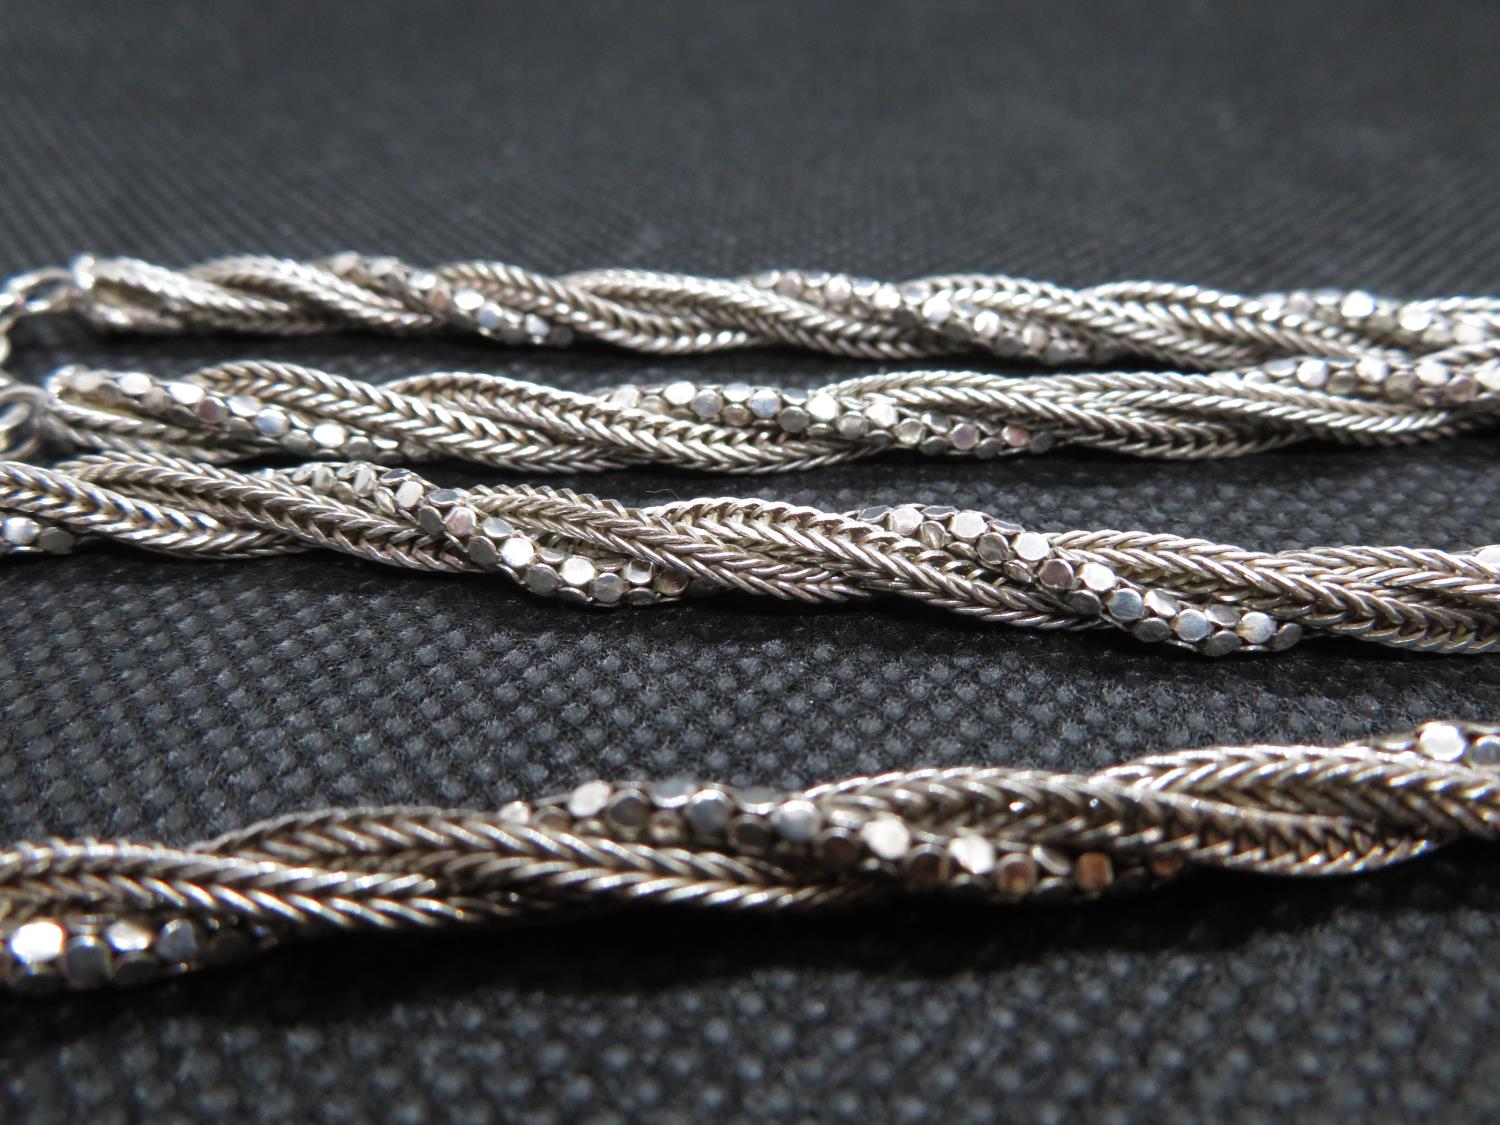 Silver Twist necklace 23.5g - Image 2 of 3